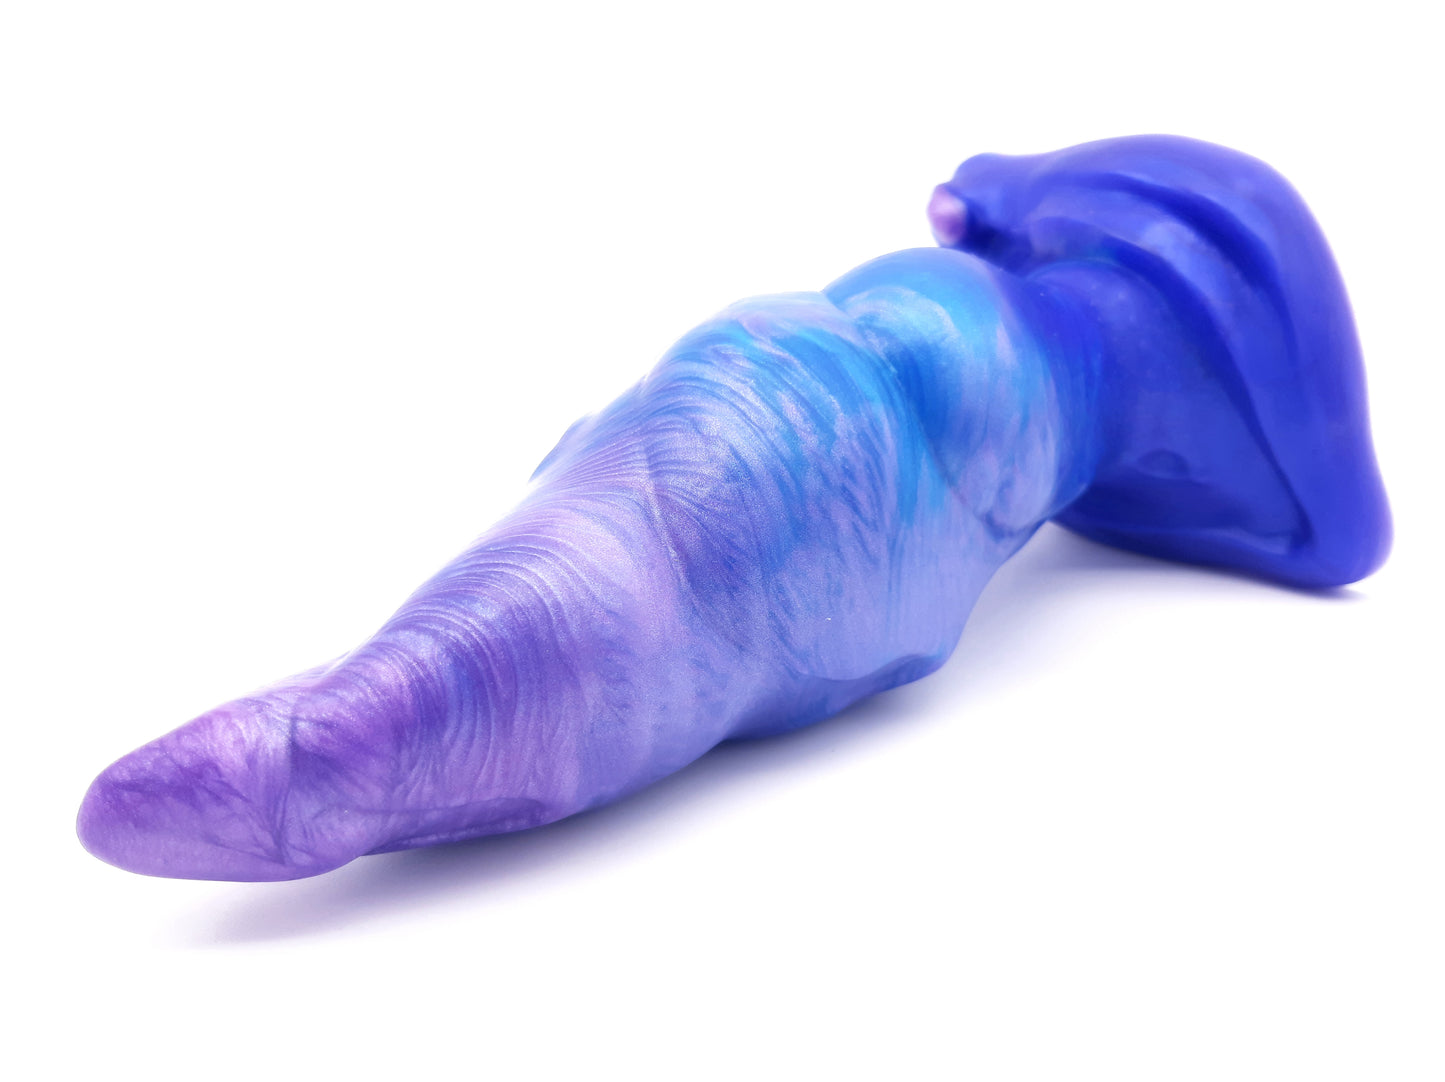 The Flora - A Floral Vulva Stylized Dildo - Small Size